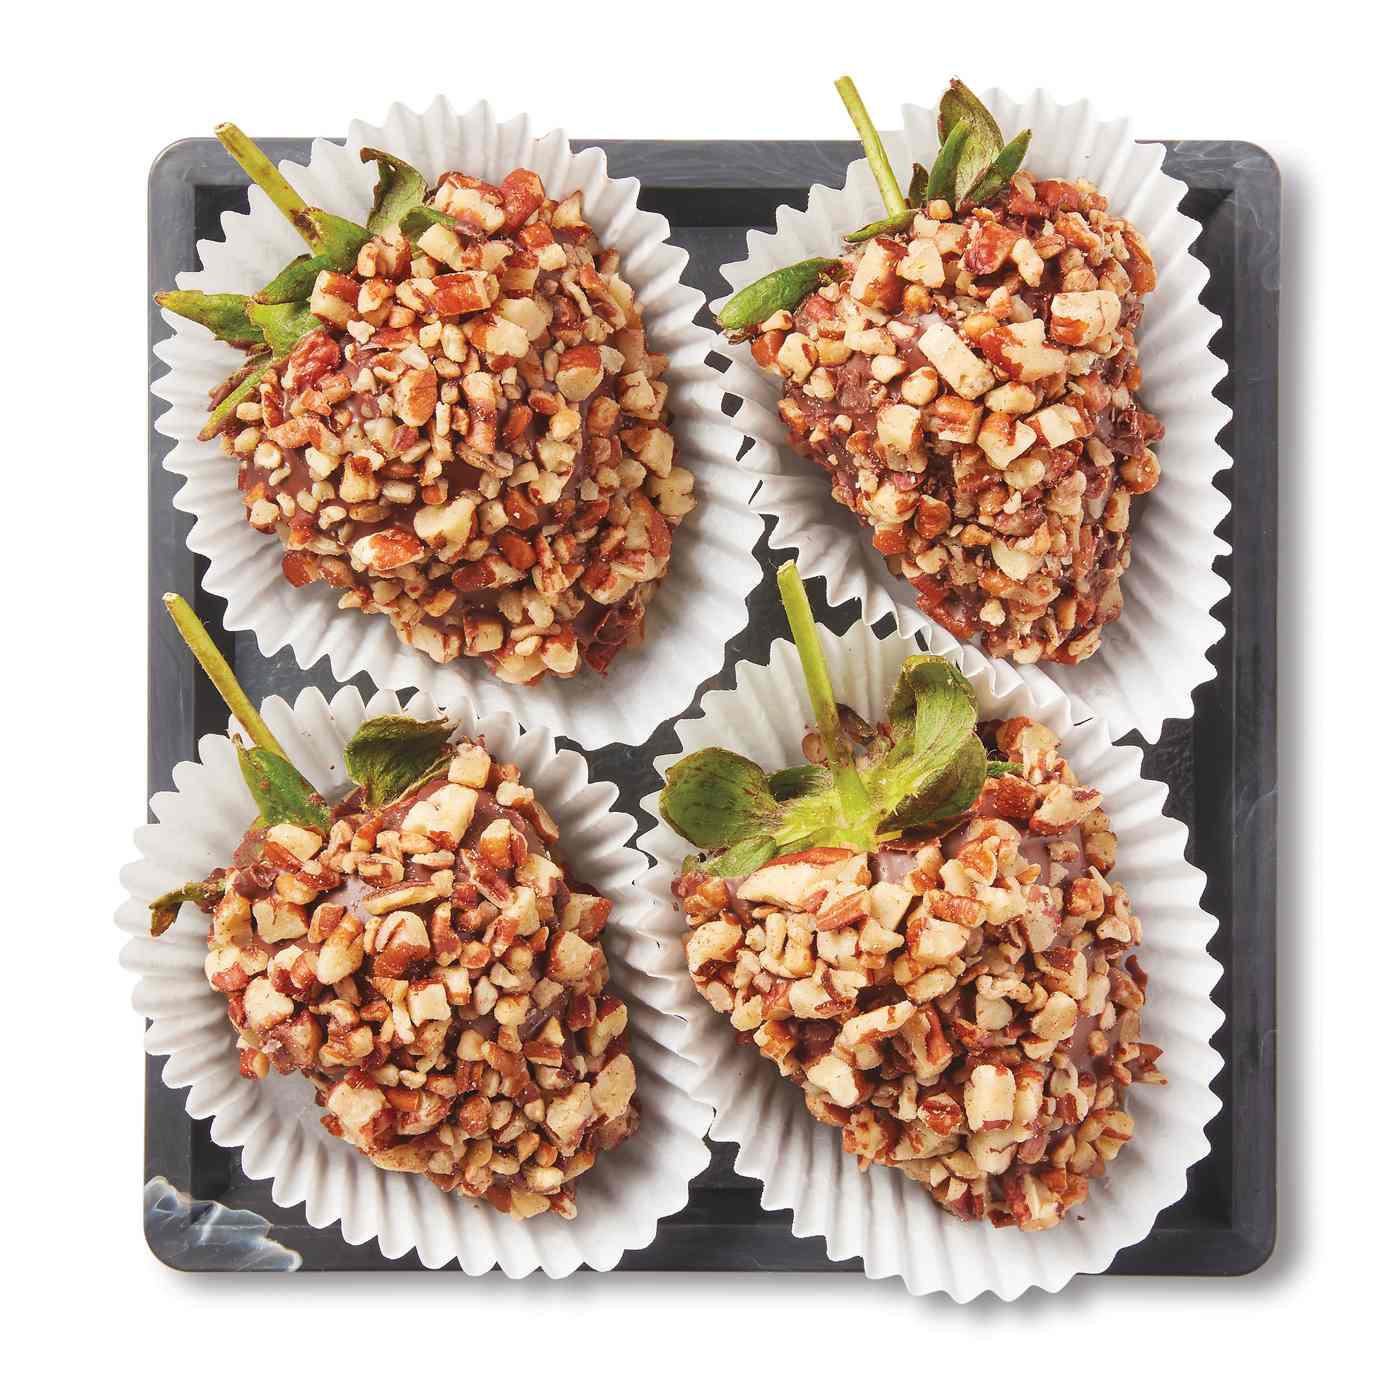 H-E-B Bakery Gourmet Chocolate-Dipped Strawberries - Pecans; image 1 of 2